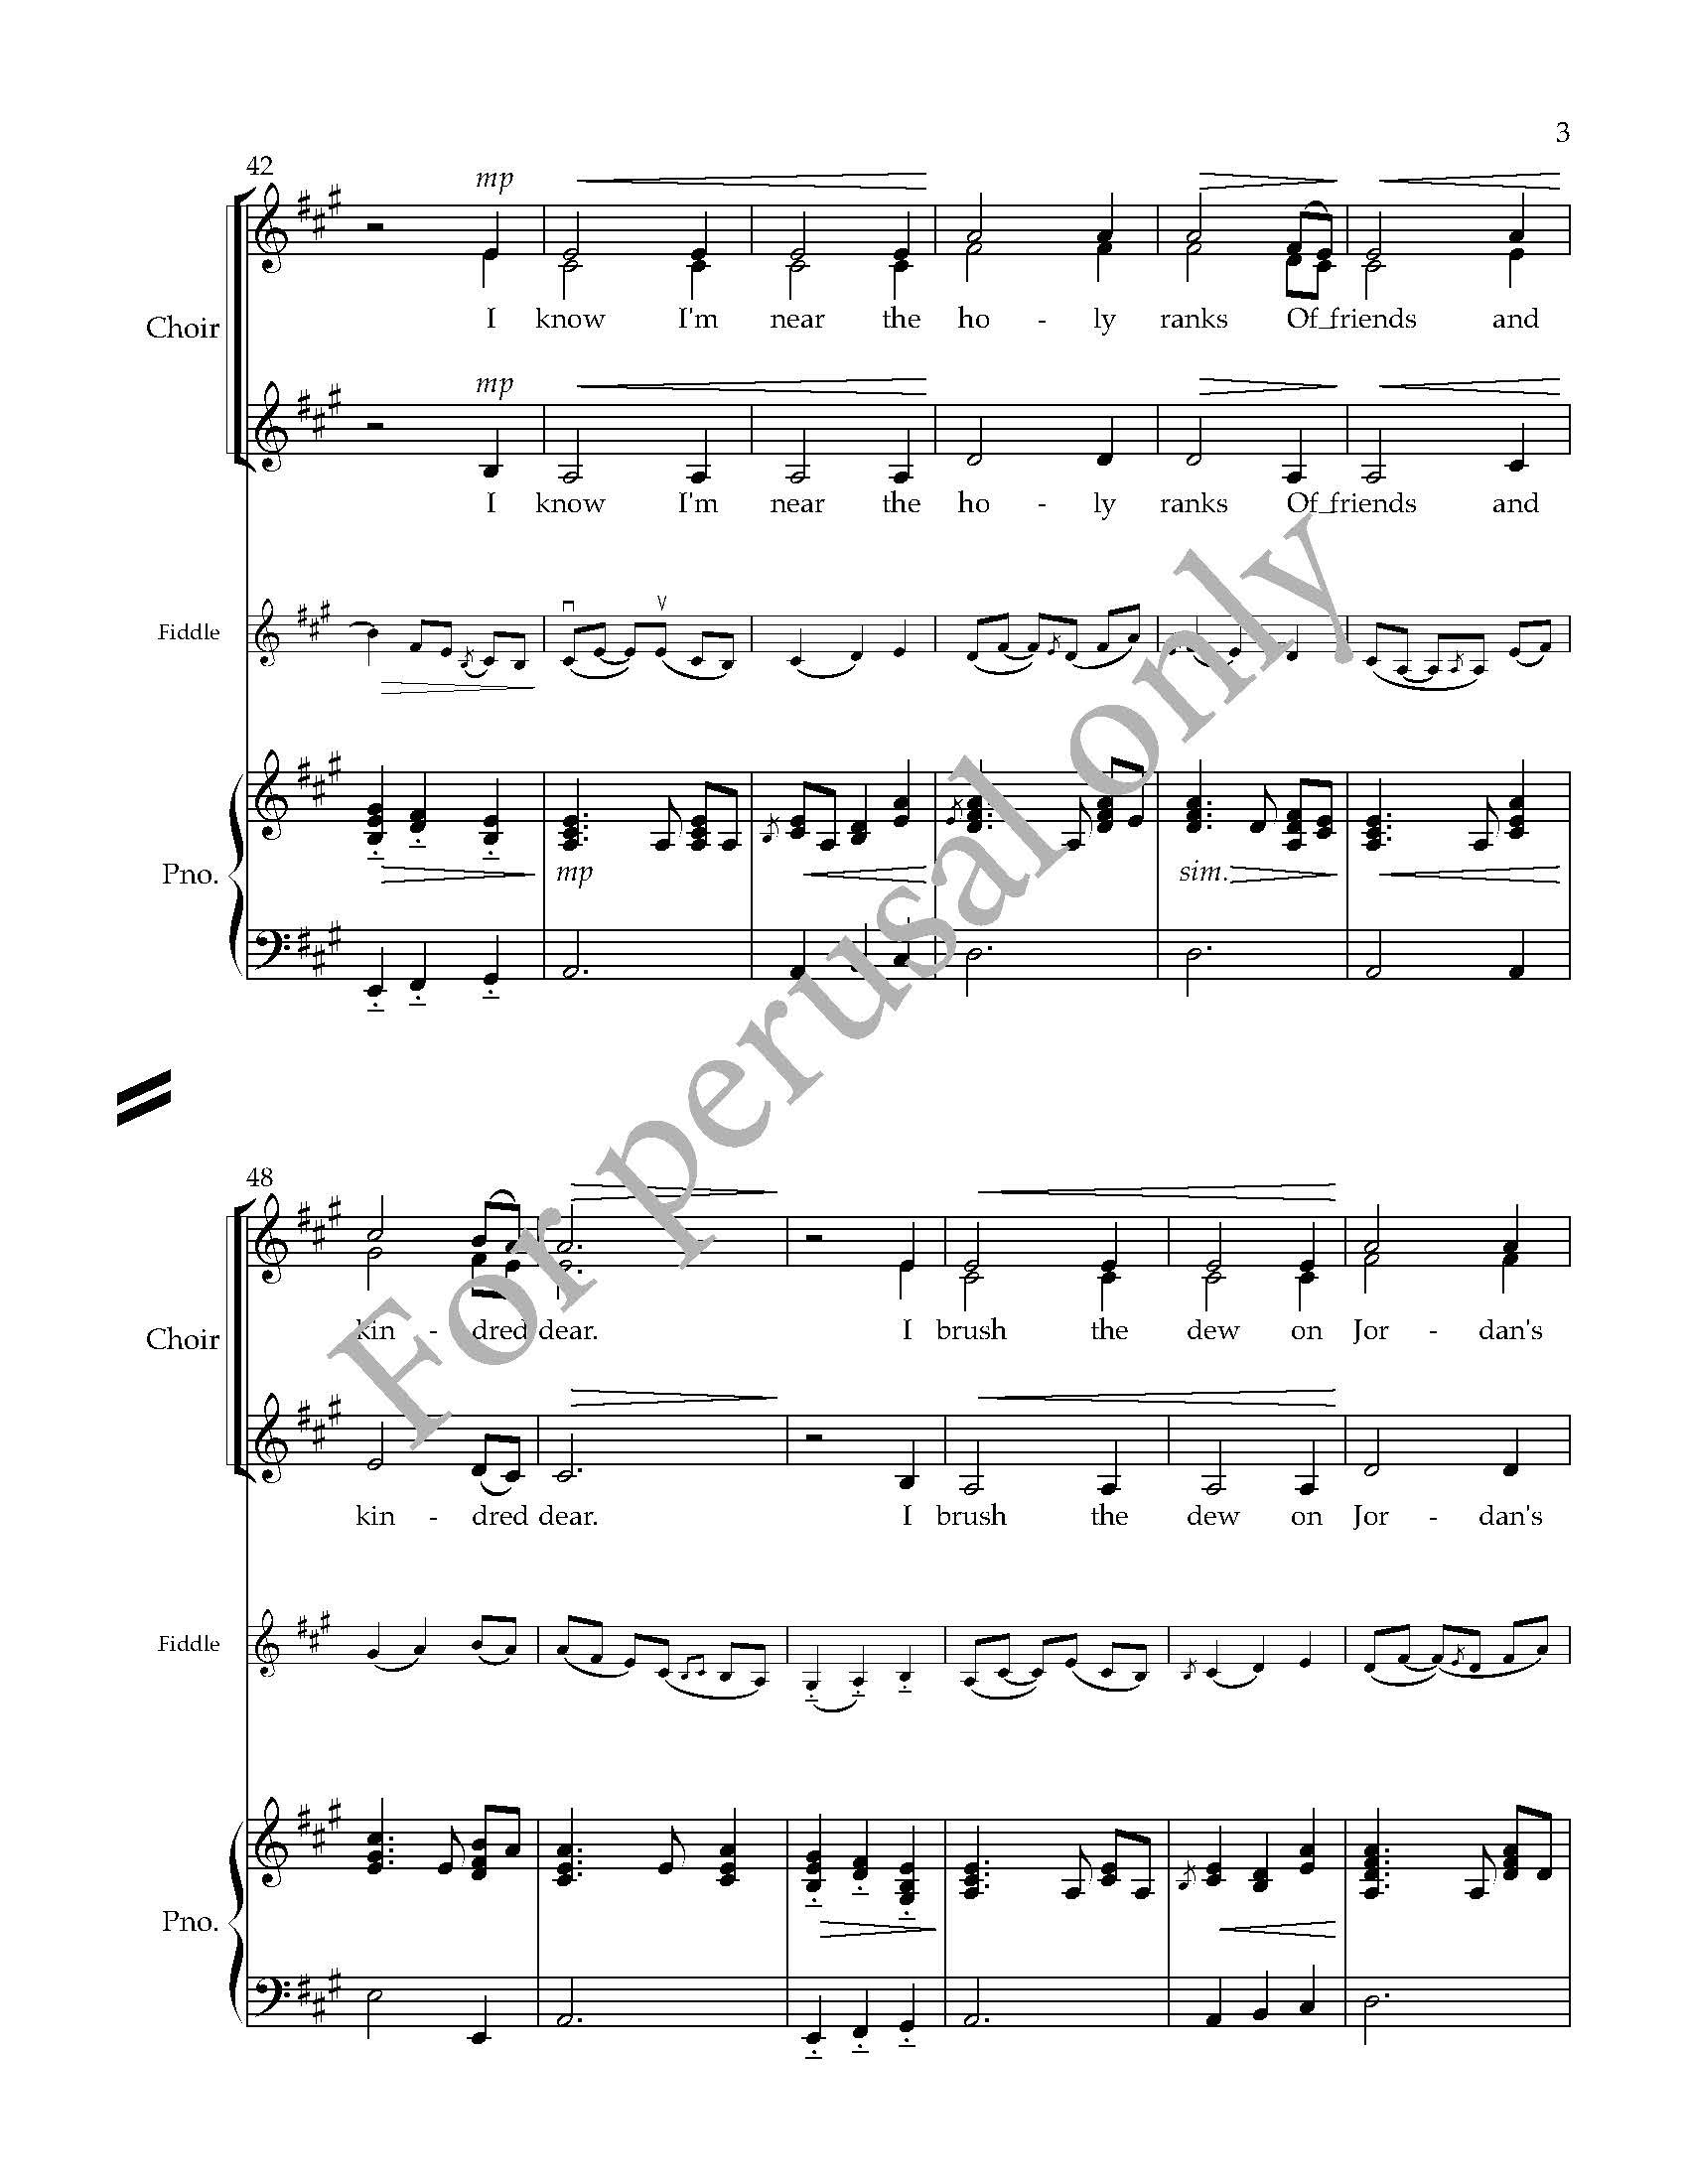 VOCAL SCORE  preview- Angel Band for three-part choir, piano, fiddle, guitar, string bass - arr. Ryan James Brandau_Page_05.jpg